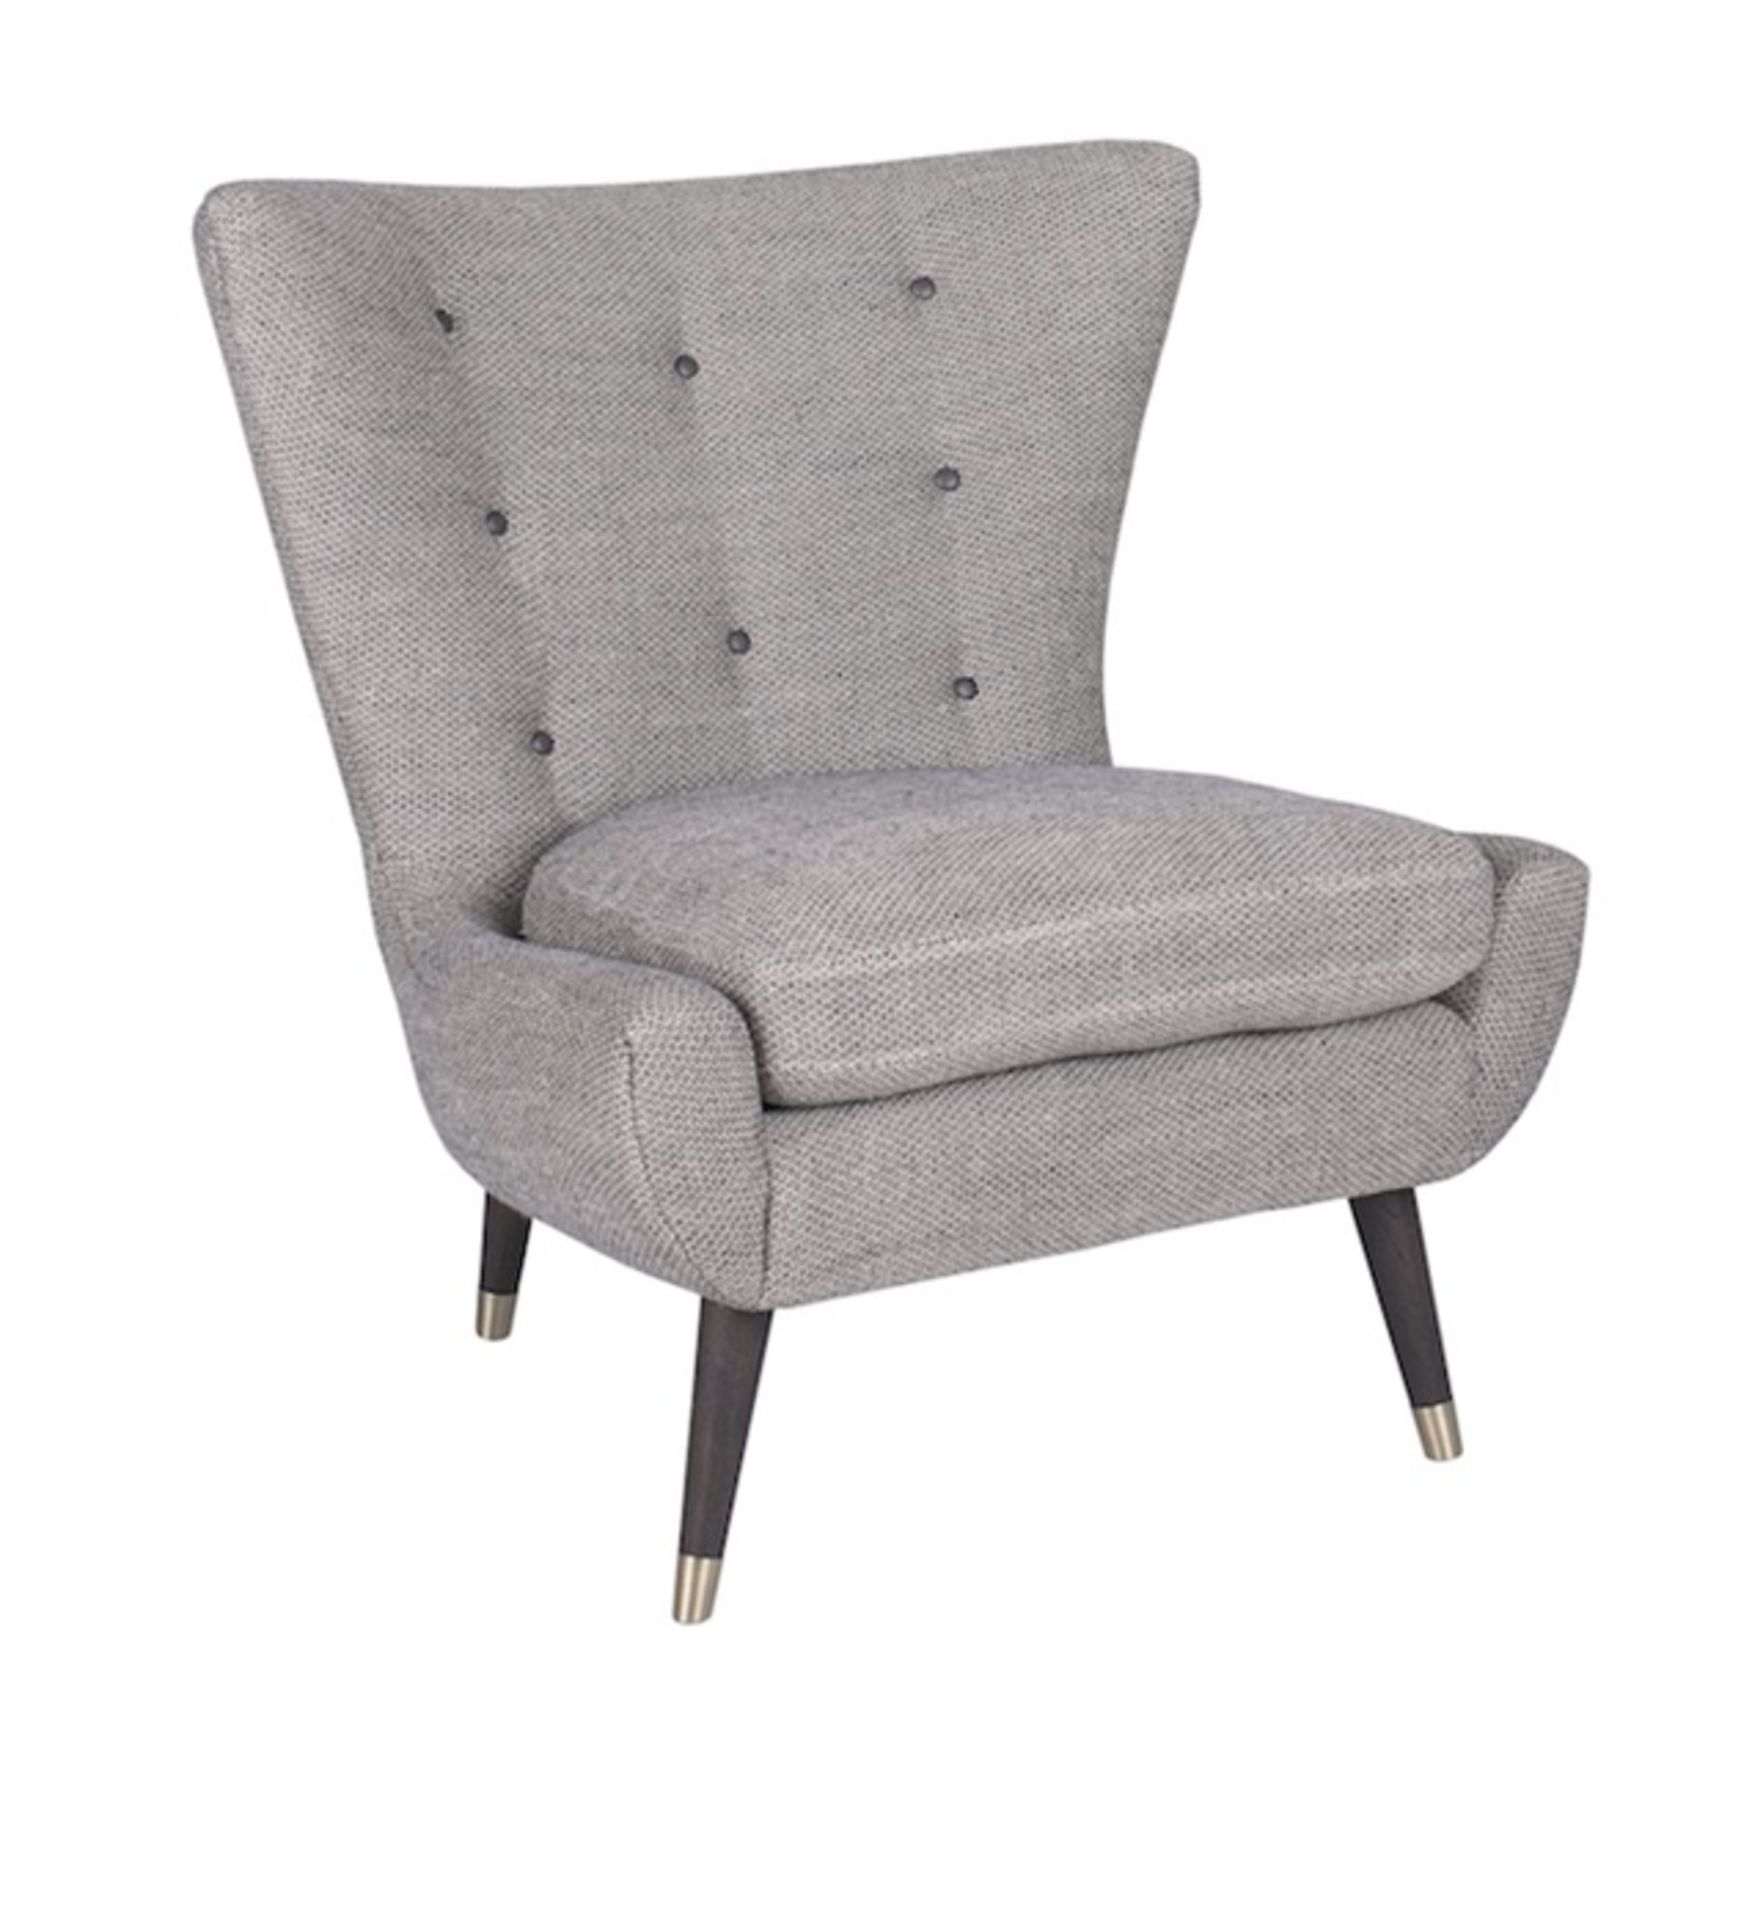 Madison Wing Chair- A Stylish Scandi Inspired Shape Dressed In Belgian Libeco Linen 87 x 86 x 92cm